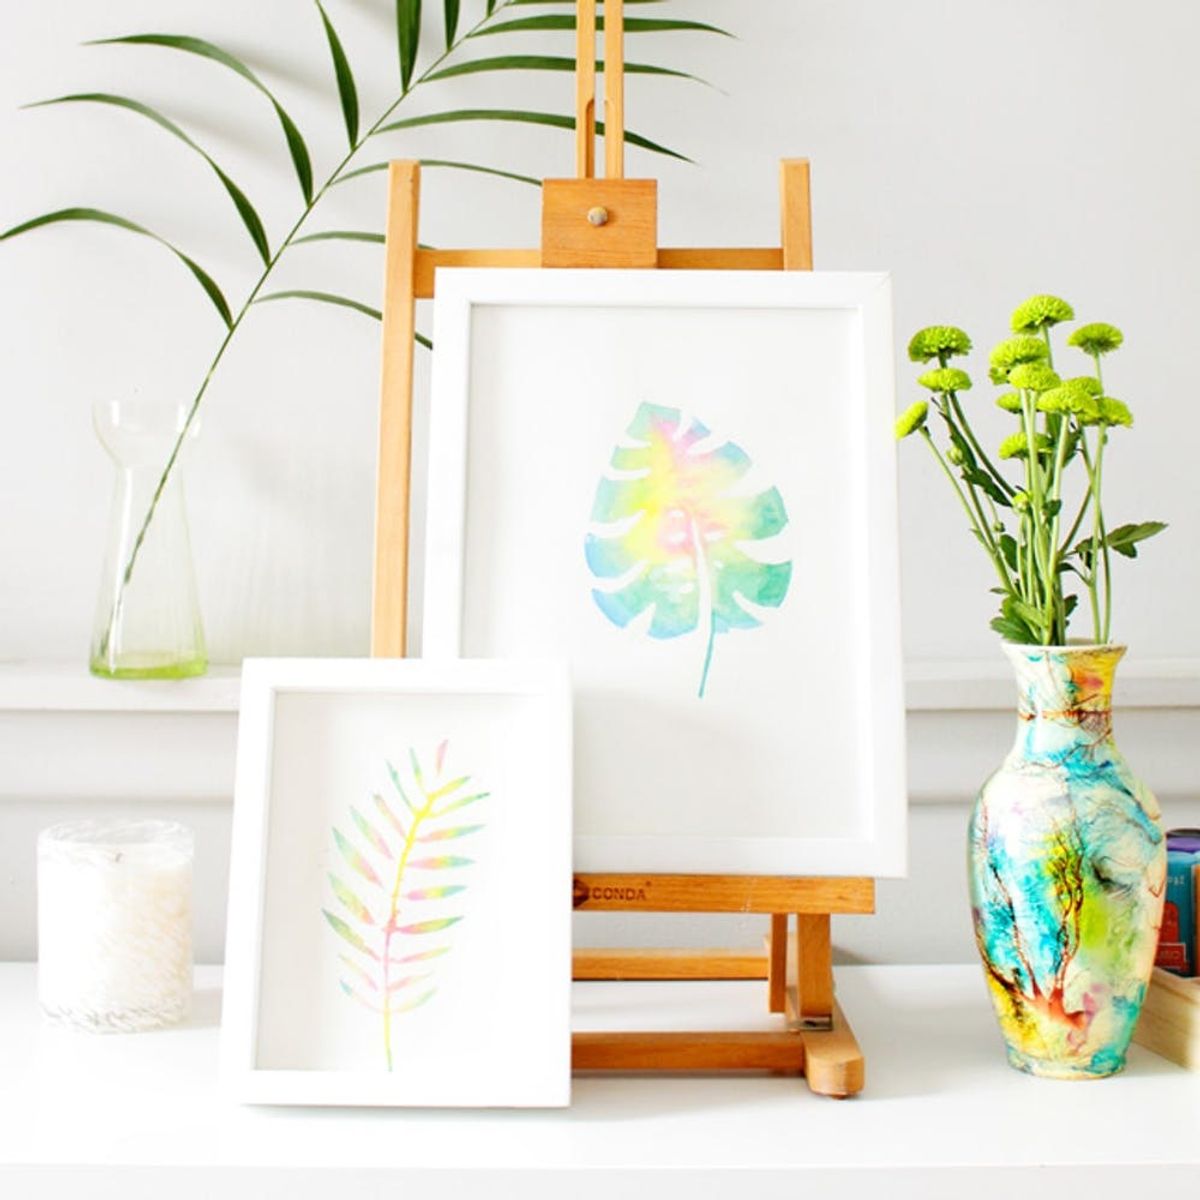 Create This Anthropologie Watercolor Wall Art for Half the Price